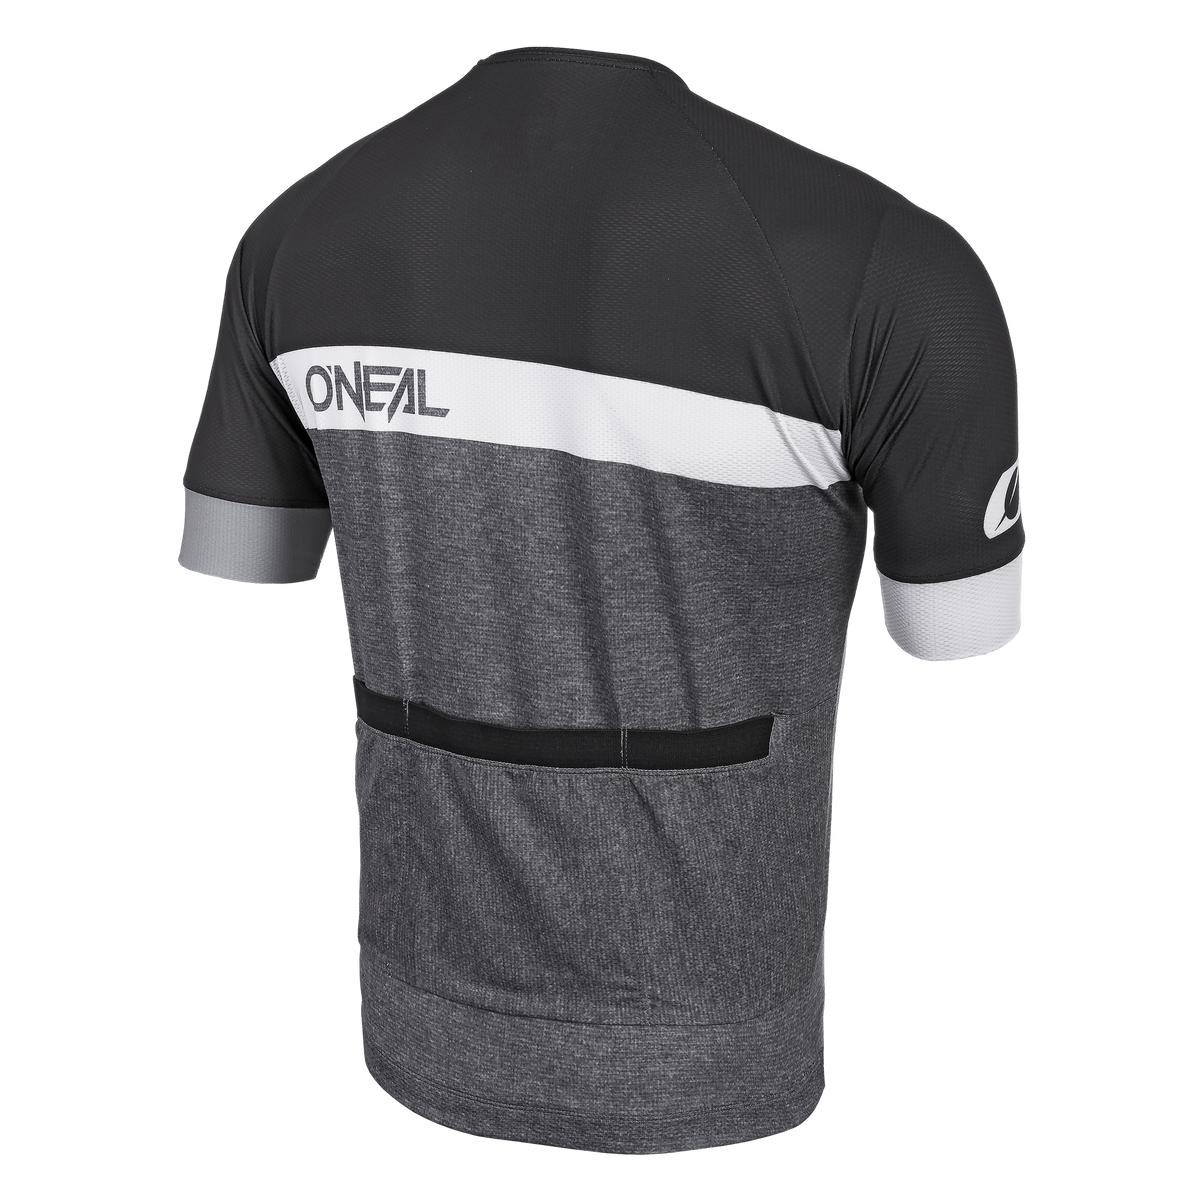 https://cdn.oneal.eu/assets/importedProductImages/CLOTHING/MTB/AERIAL/SPLIT/black_gray/2021_ONeal_AERIAL_Jersey_SPLIT_black_gray_back.png